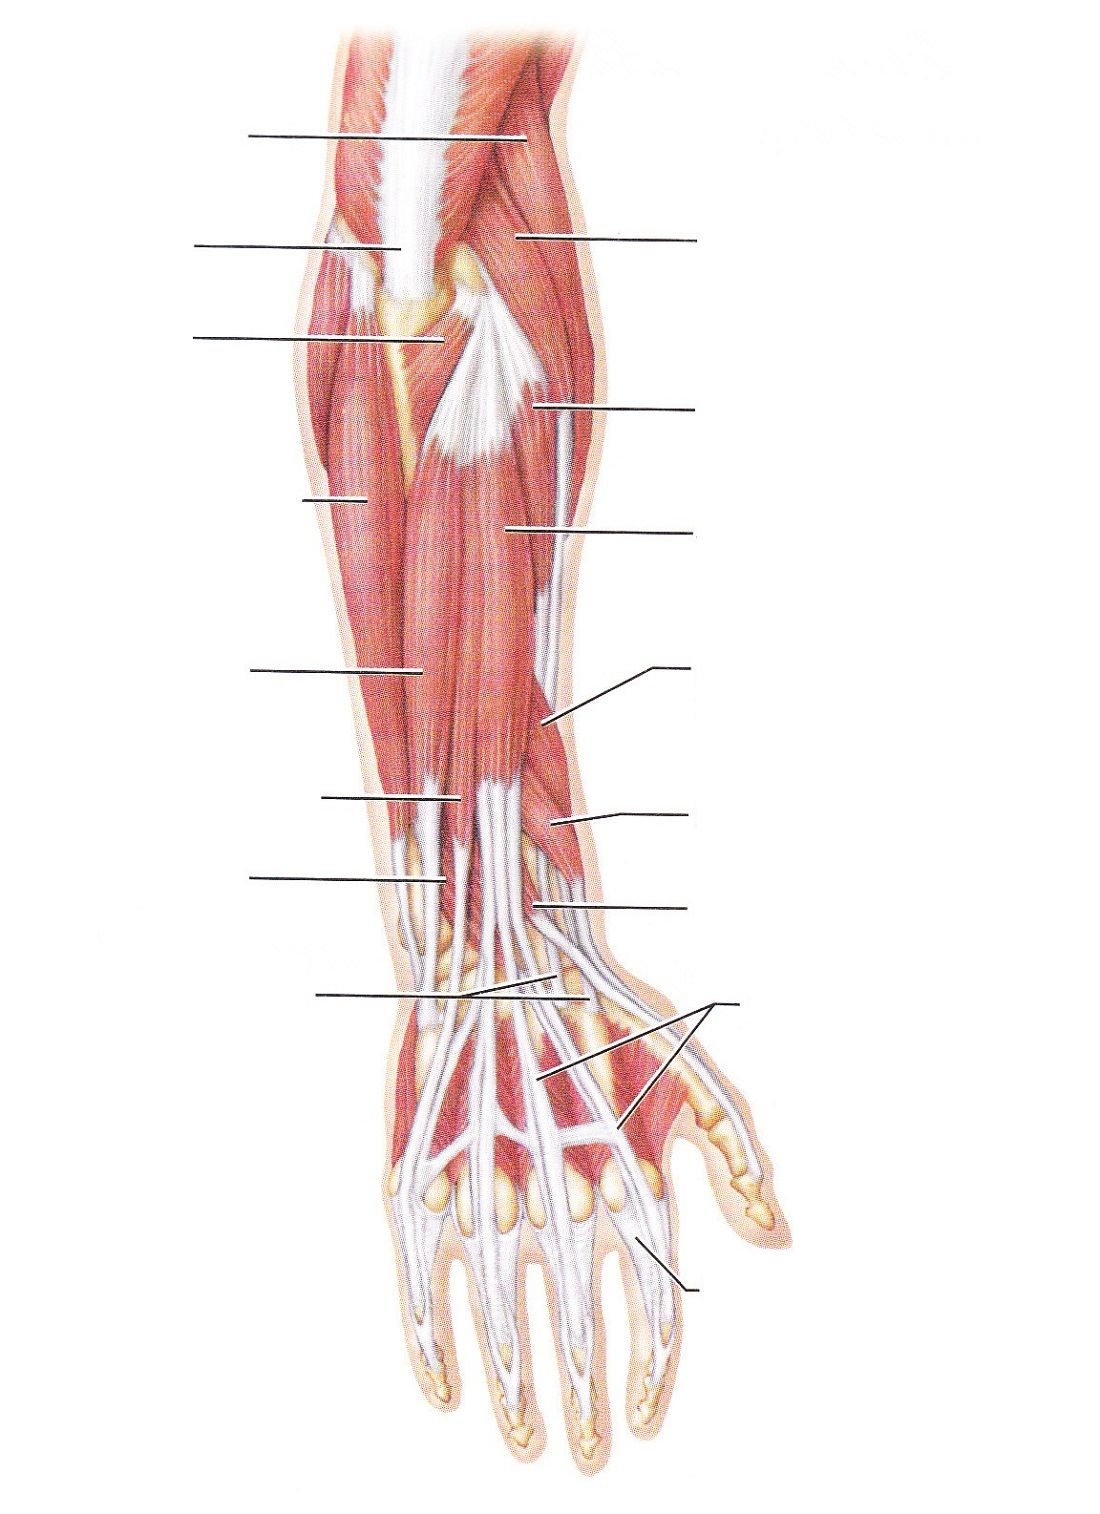 Arm Muscle Diagram Blank Arm Diagram Preview Wiring Diagram